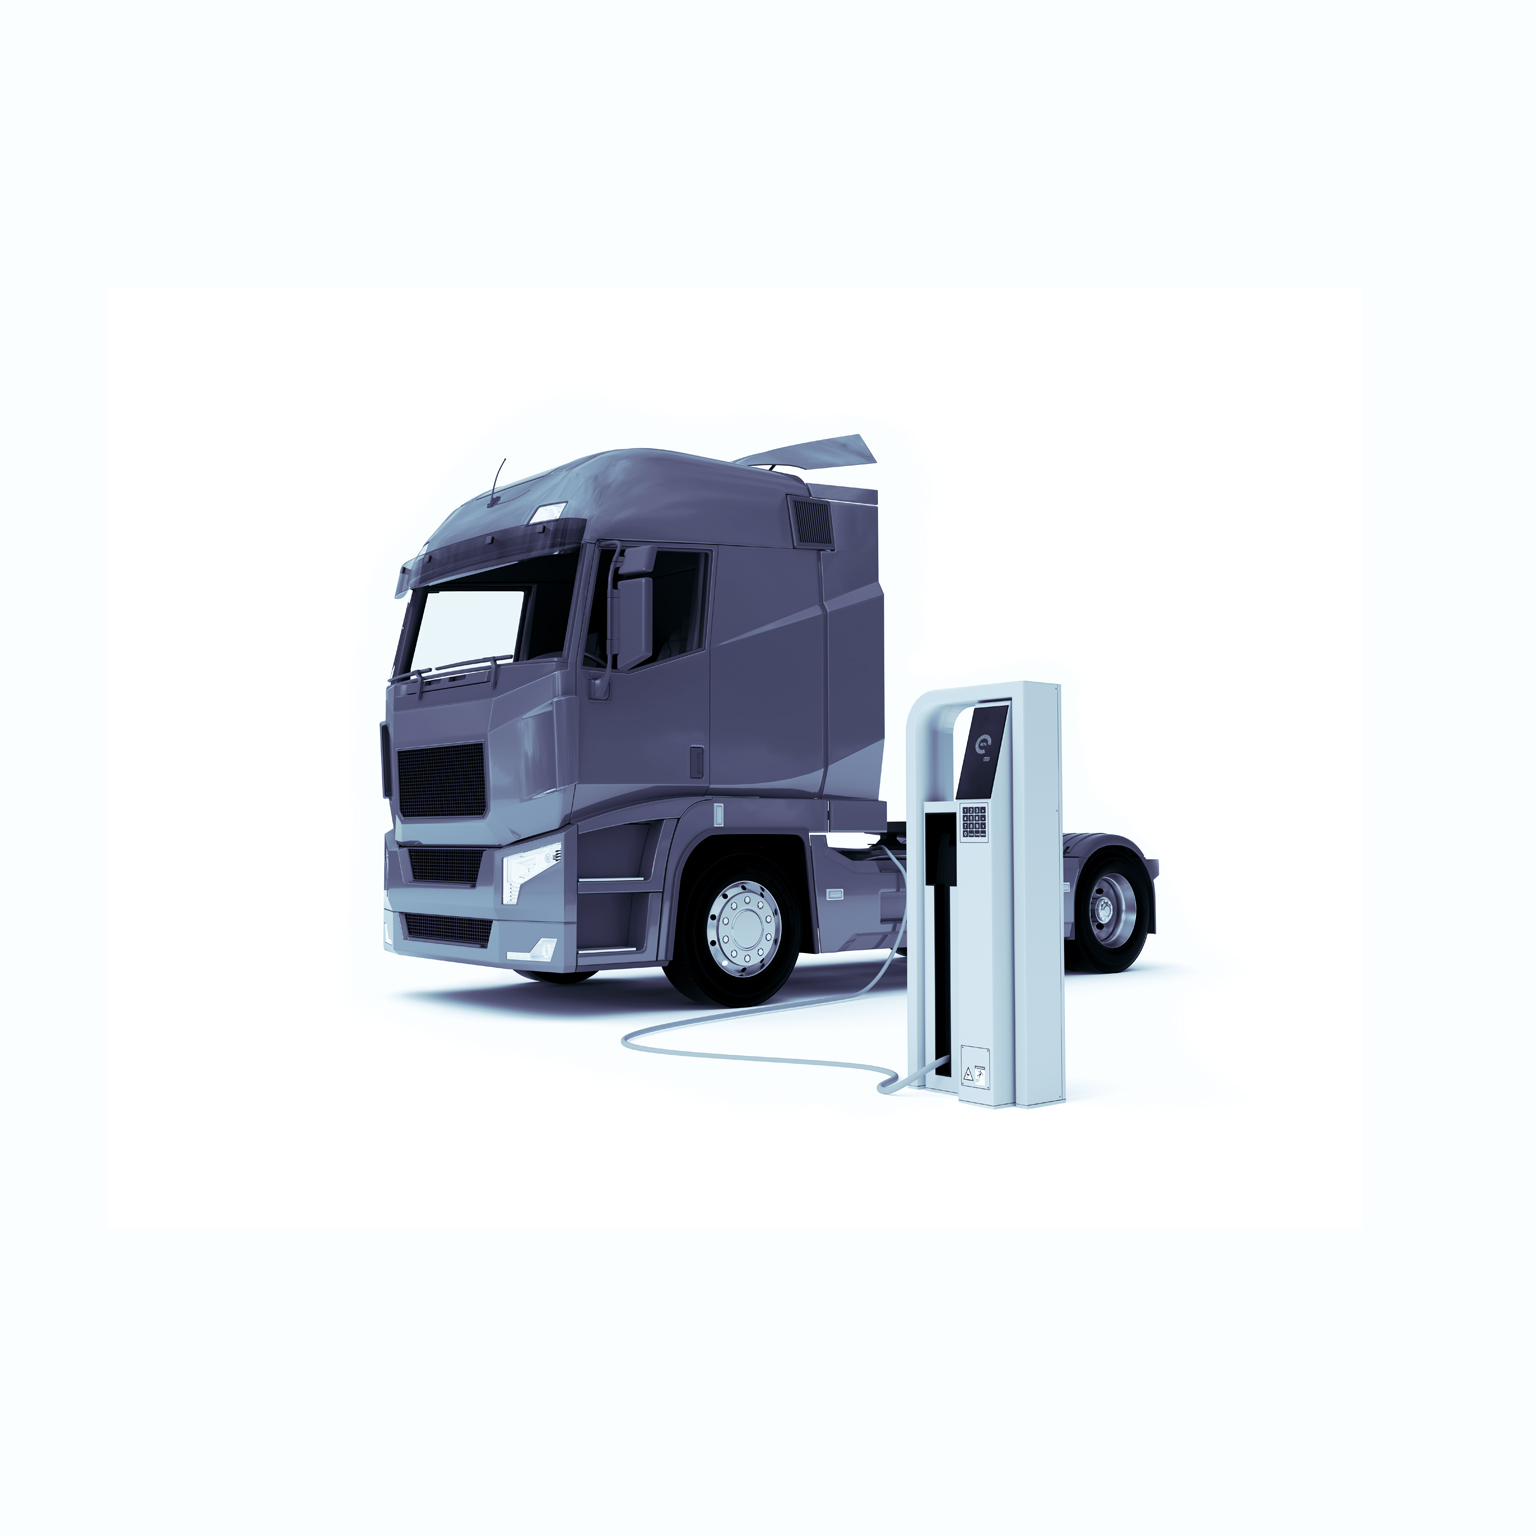 Why most electric trucks will choose overnight charging McKinsey